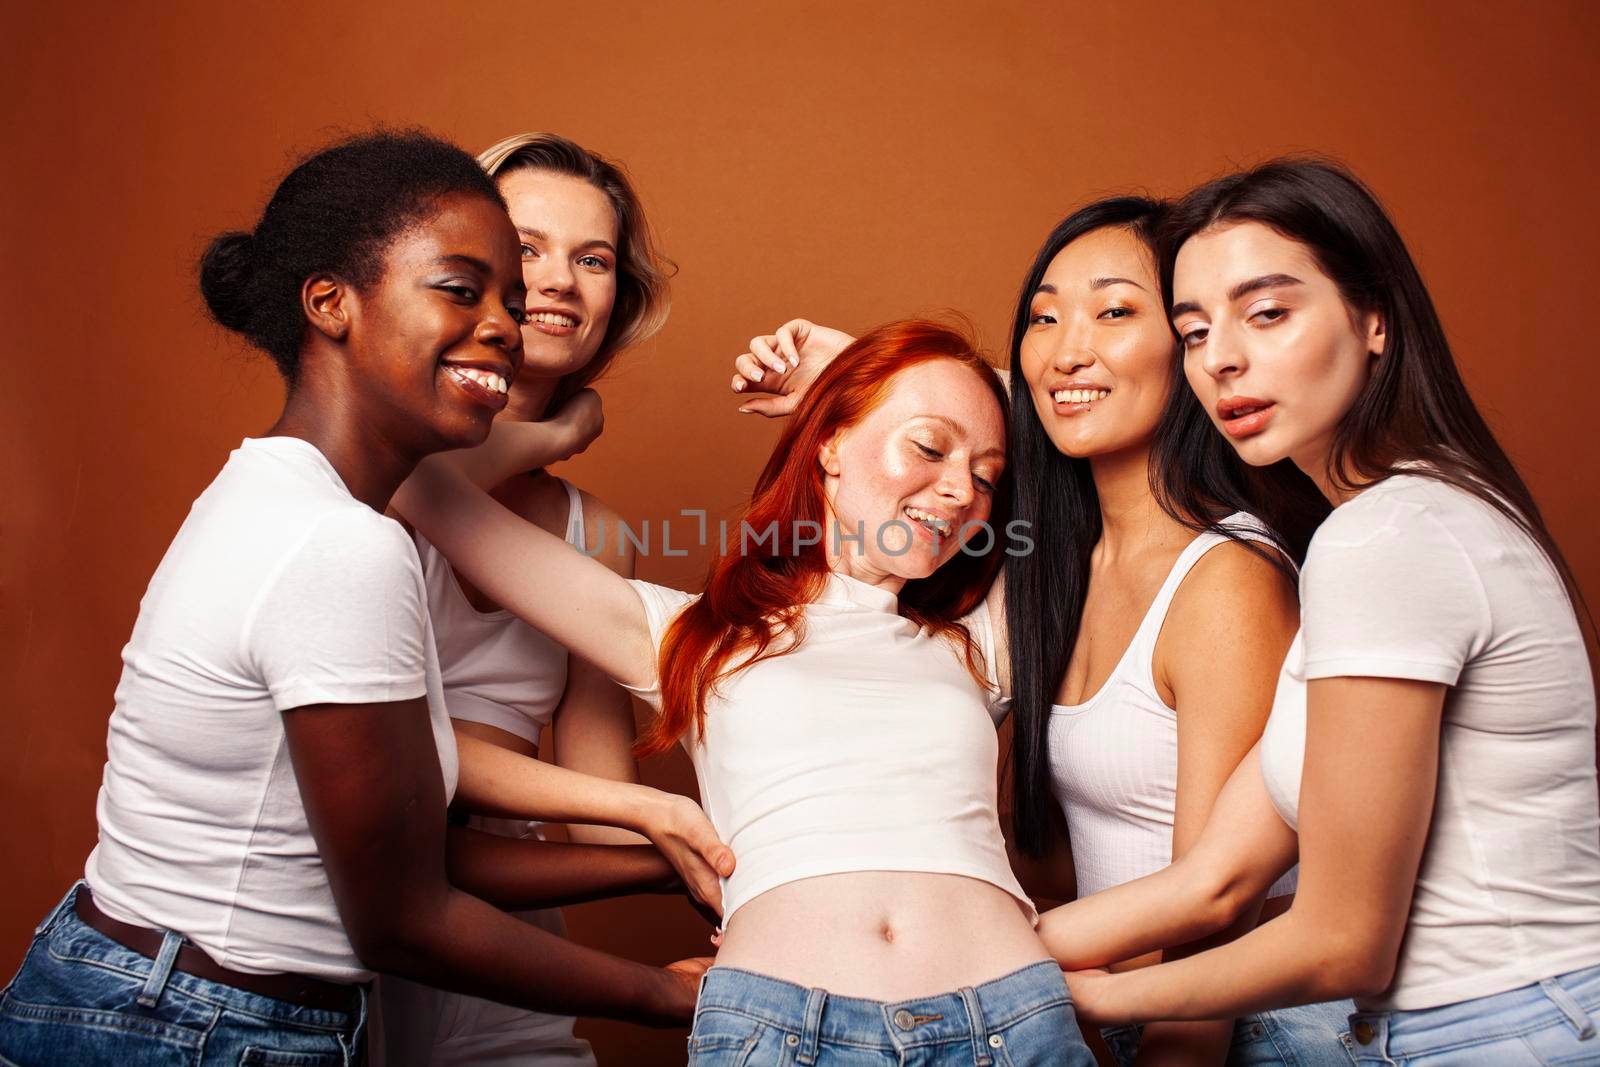 young pretty african and caucasian women posing cheerful together on brown background, lifestyle diverse nationality people concept close up